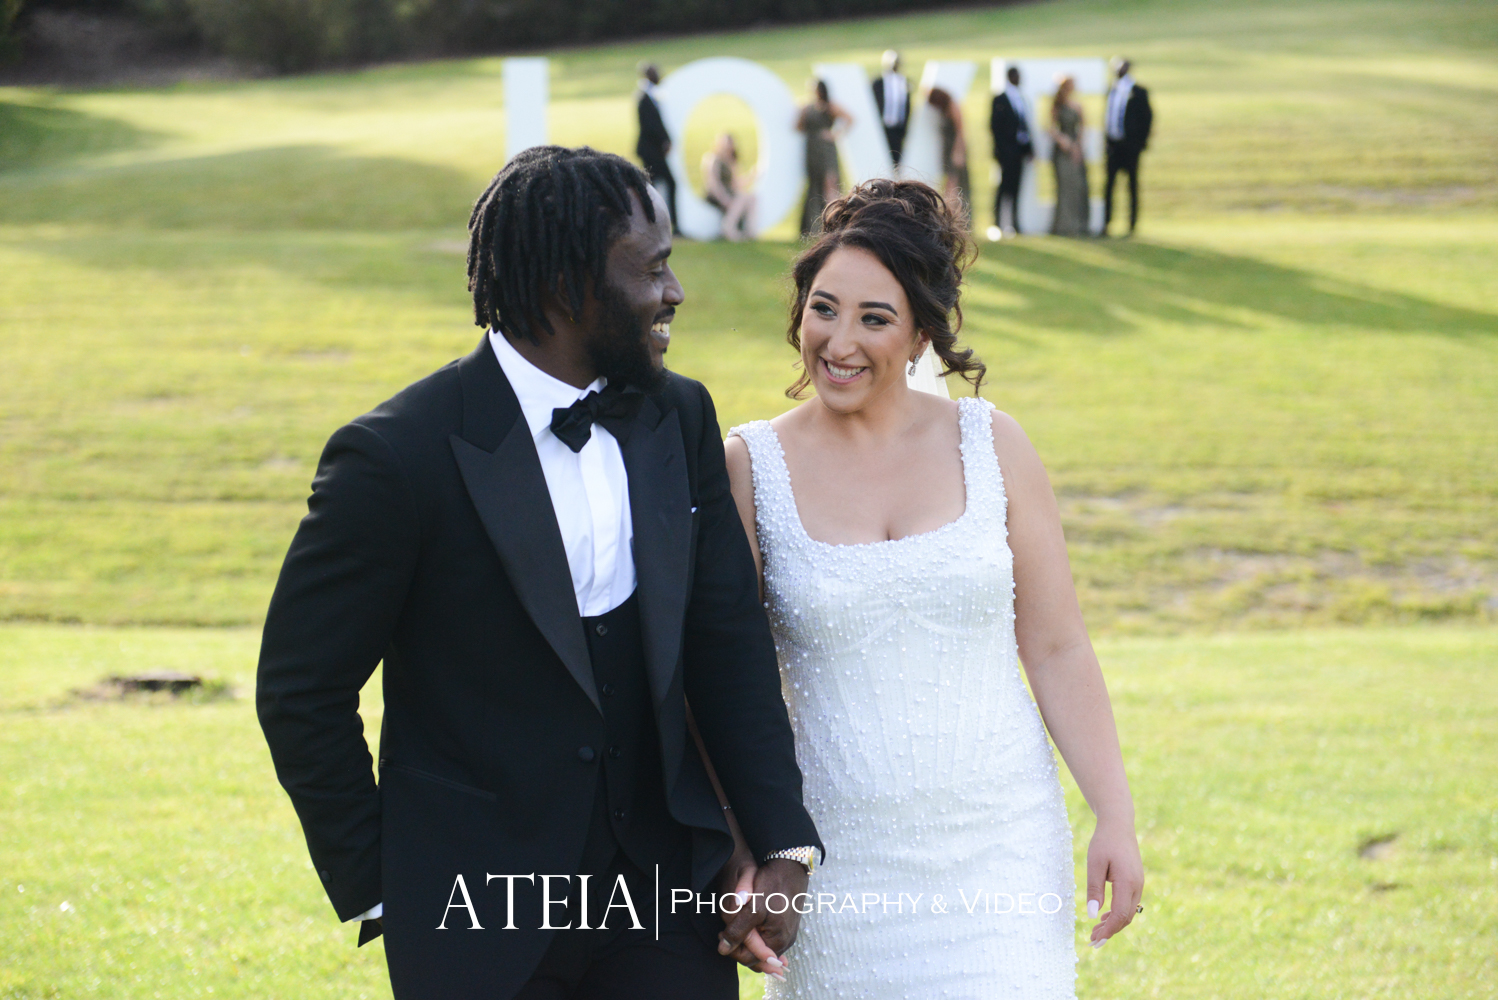 , Nicole and Kingsley&#8217;s wedding photography at BramLeigh Estate Warrandyte captured by ATEIA Photography &#038; Video